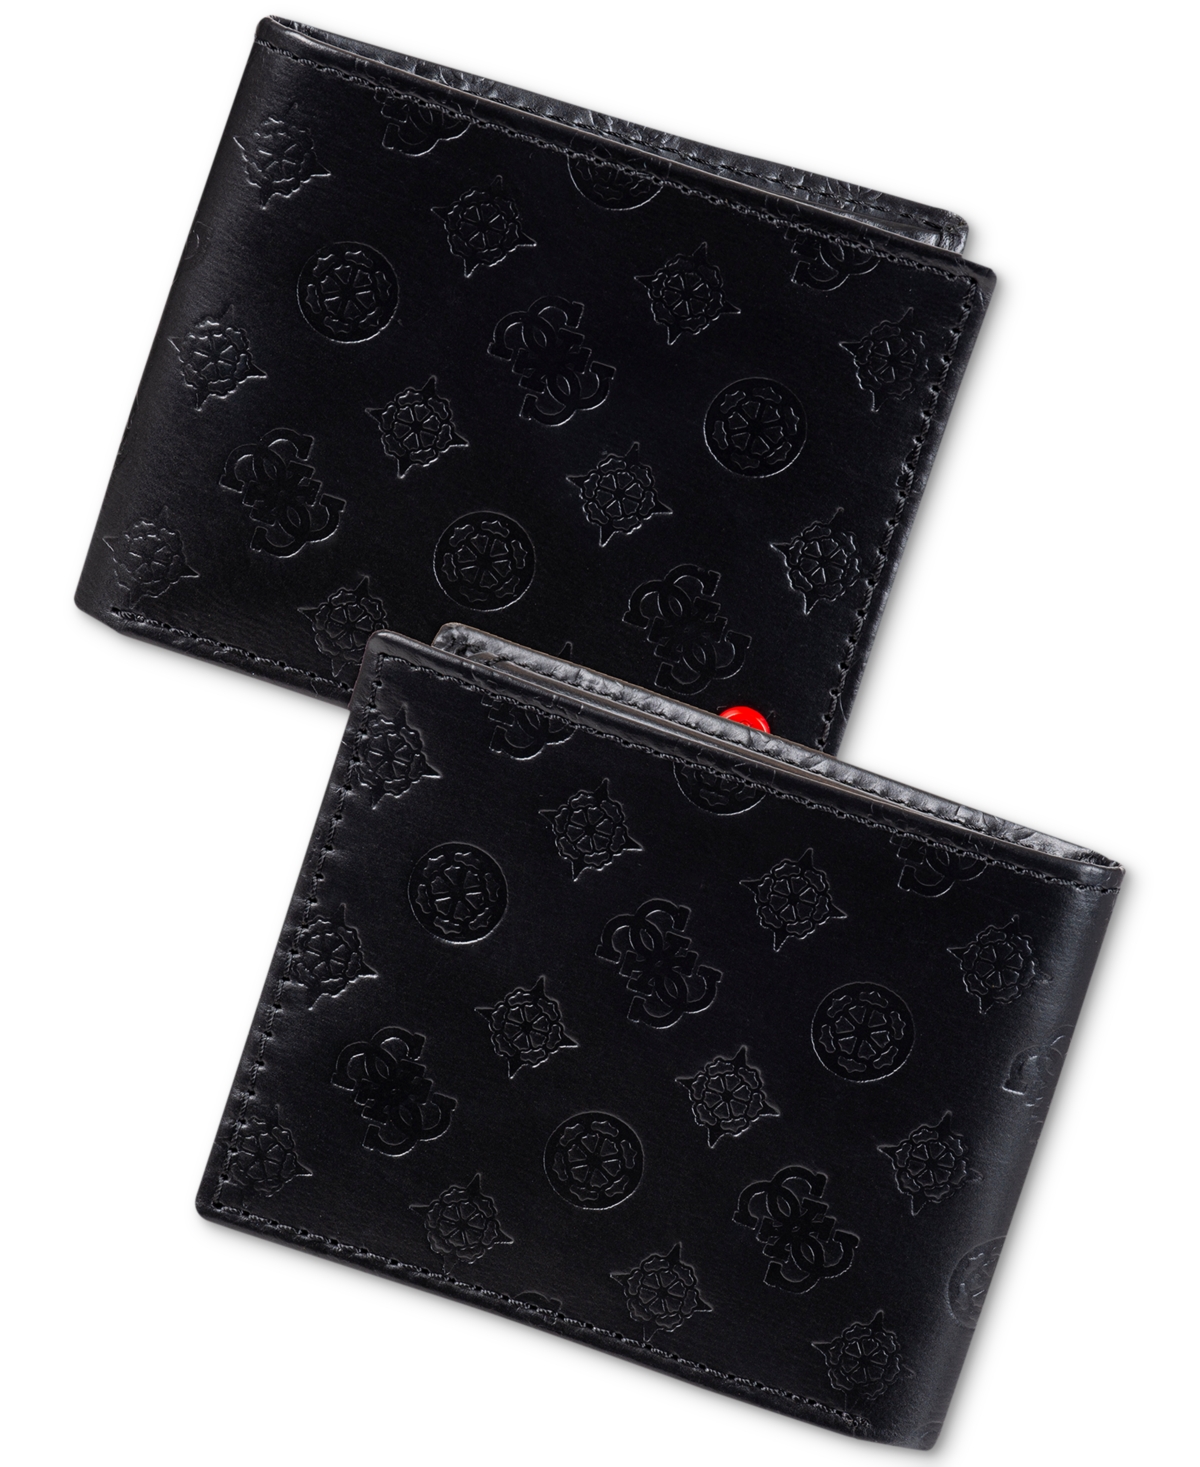 Shop Guess Men's Rfid Embossed Leather Passcase Wallet In Black